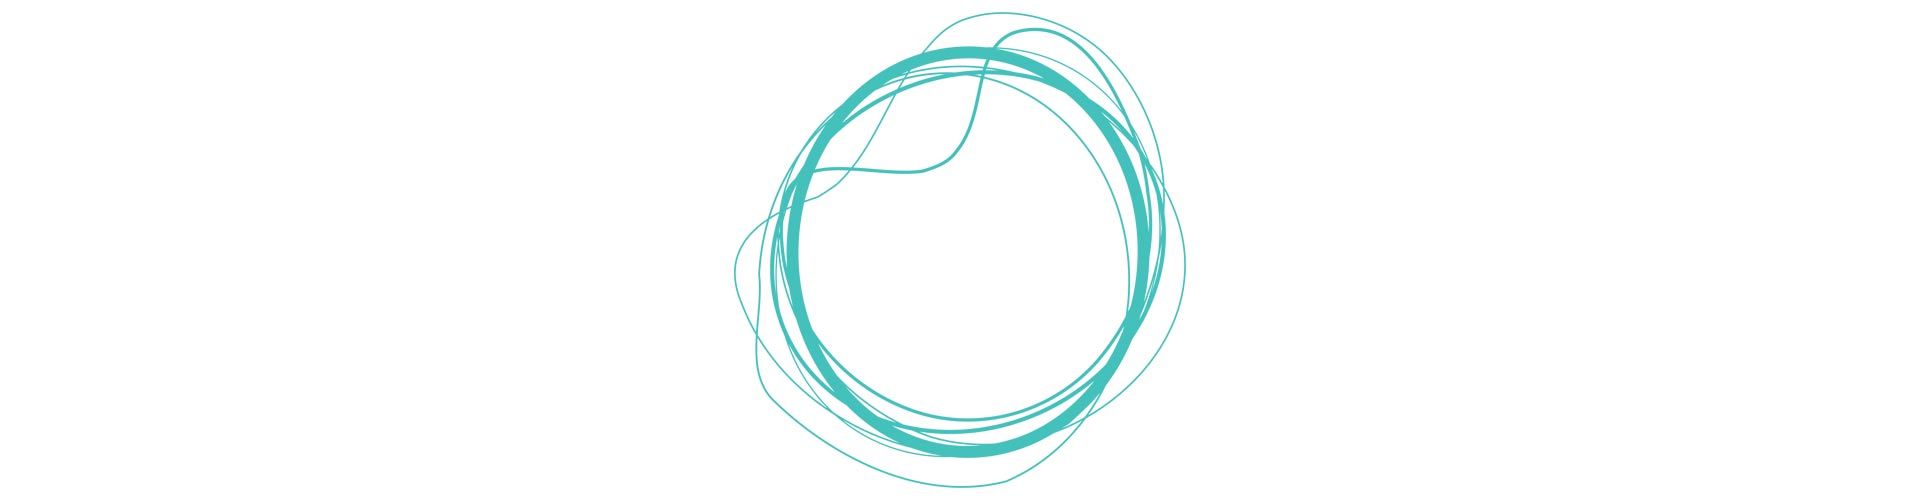 Graphic of Dental Floss in a Circle